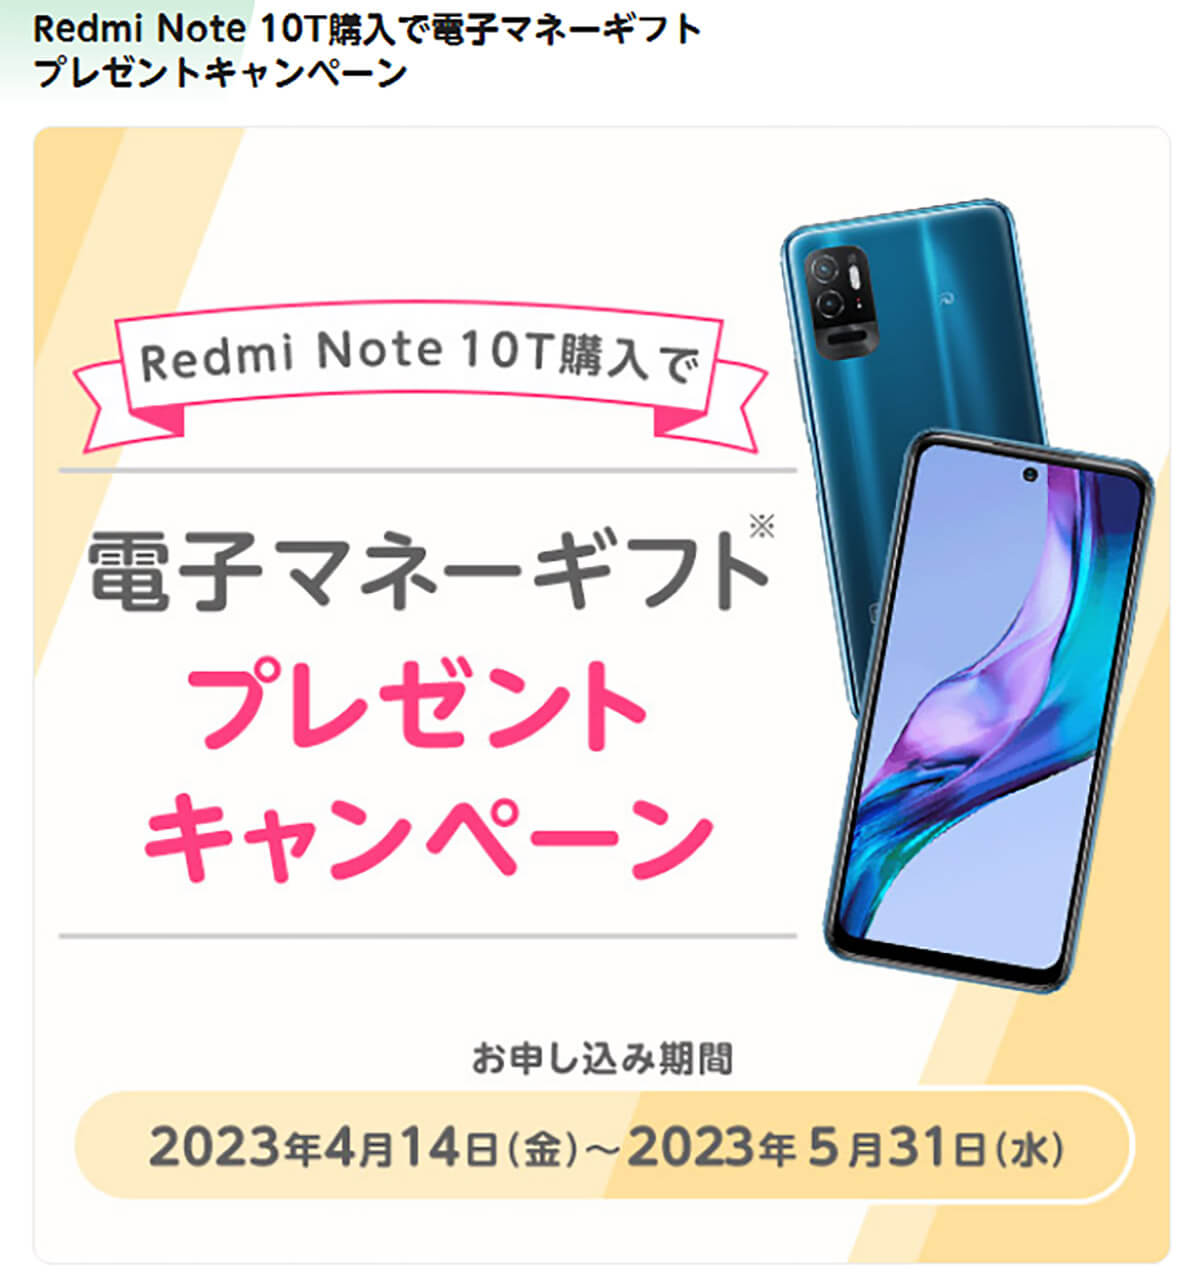 Redmi Note 10T購入で電子マネーギフトプレゼントキャンペーン